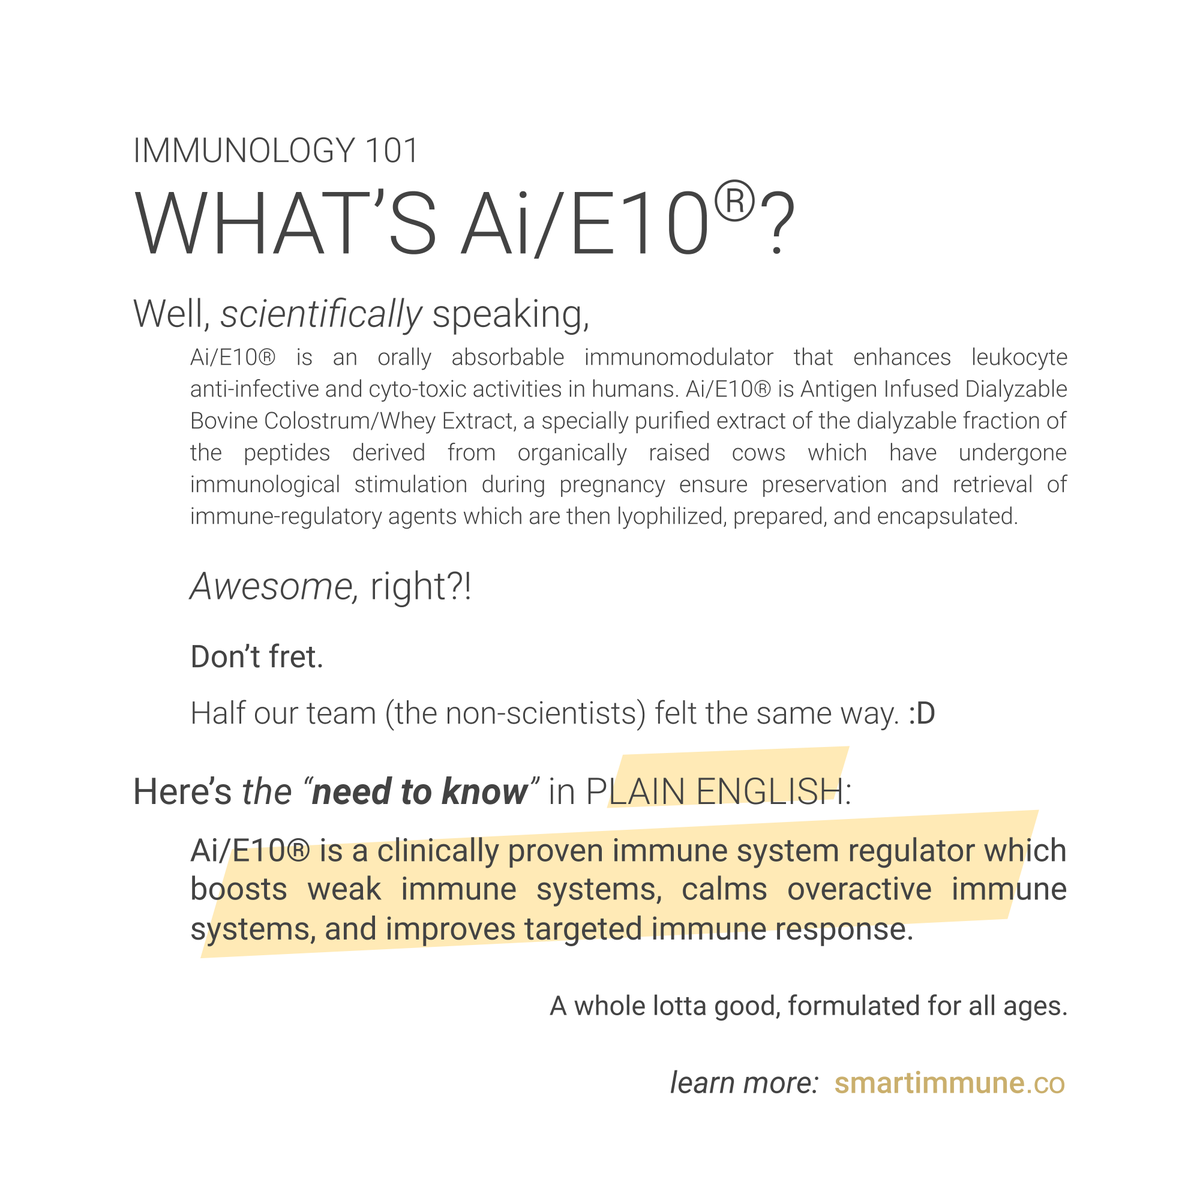 Discover Ai/E10®, the active ingredient in Santivia®. A whole lotta good, formulated for all ages! Learn more at smartimmune.co
….
#immunology #immunology101 #cellularhealth #nourishyourmind #science #immunesupport #immunehealth  #smartimmune #santivia #AiE10